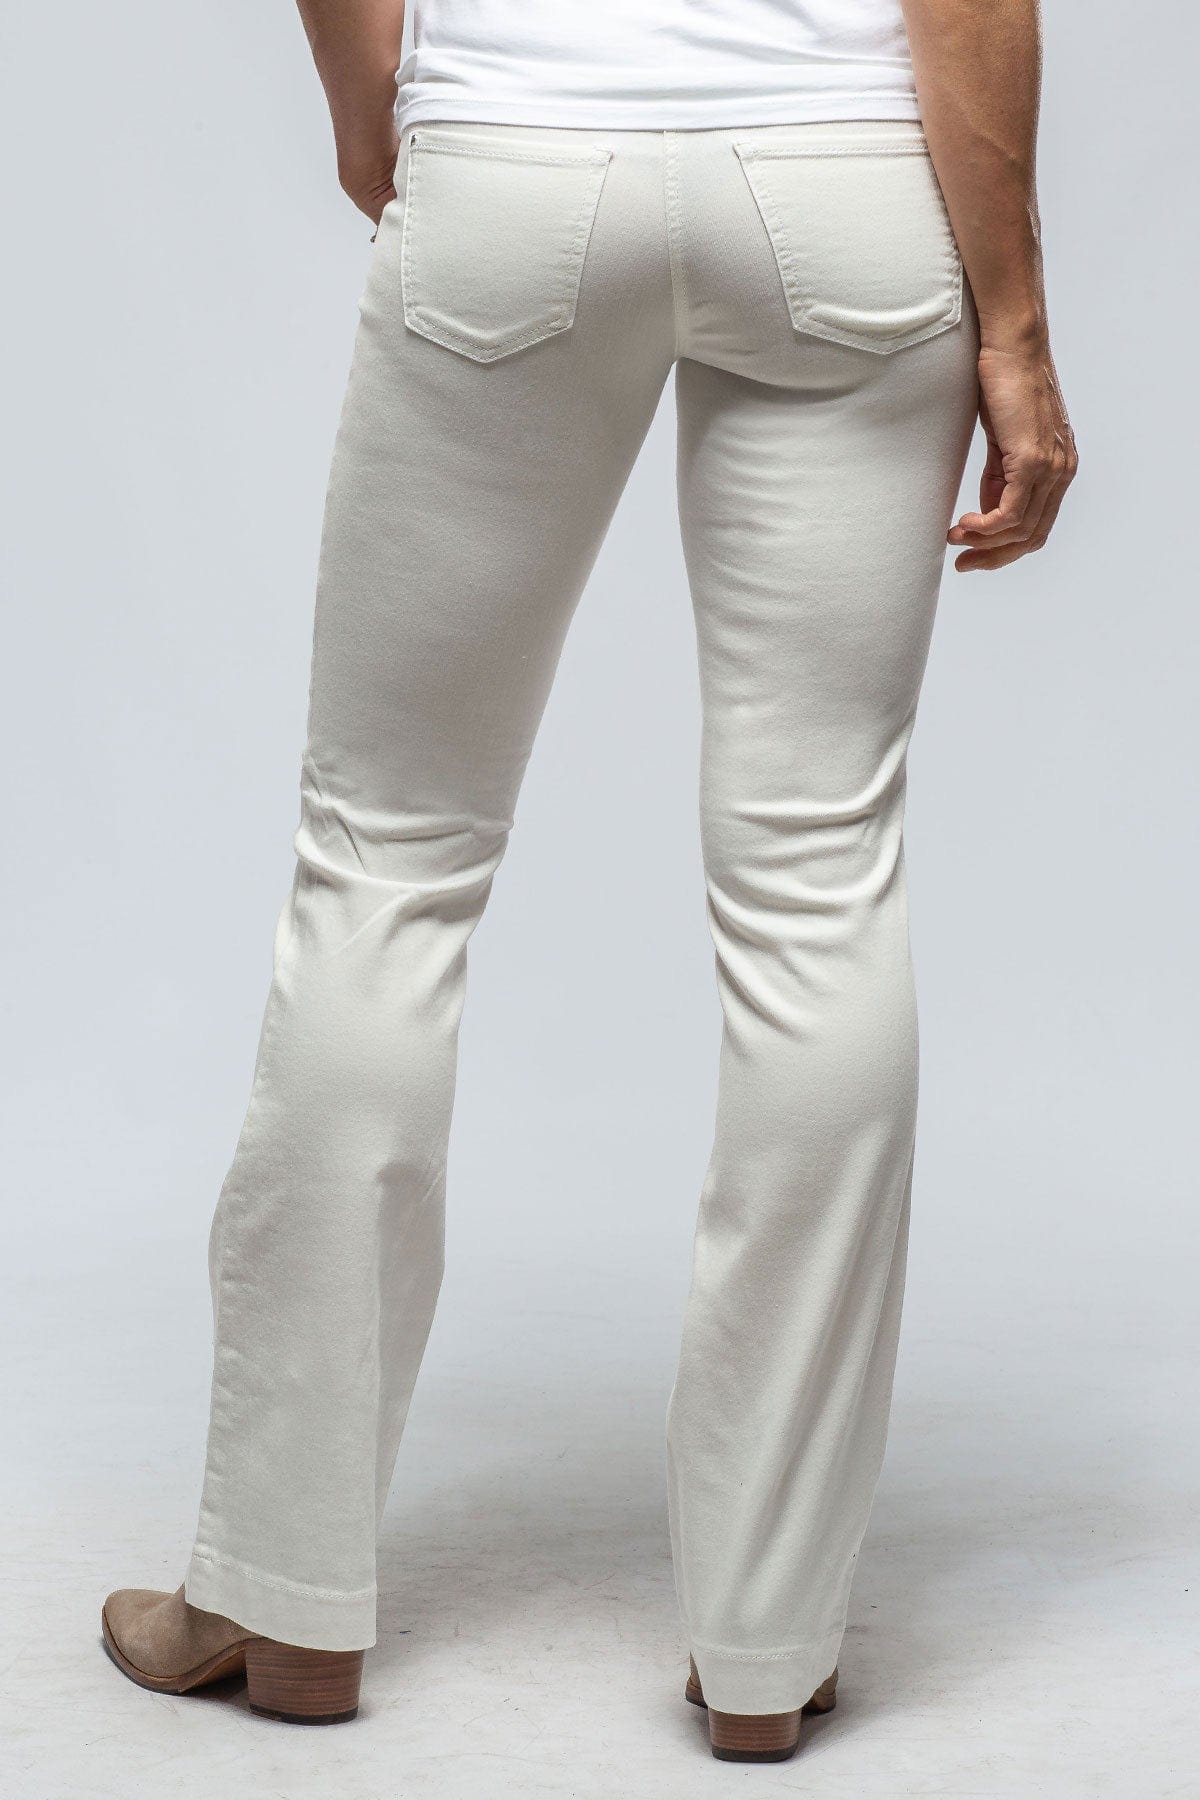 3 Ways to Wear White Jeans in Fall | White denim outfit, White jeans outfit  fall, How to wear white jeans